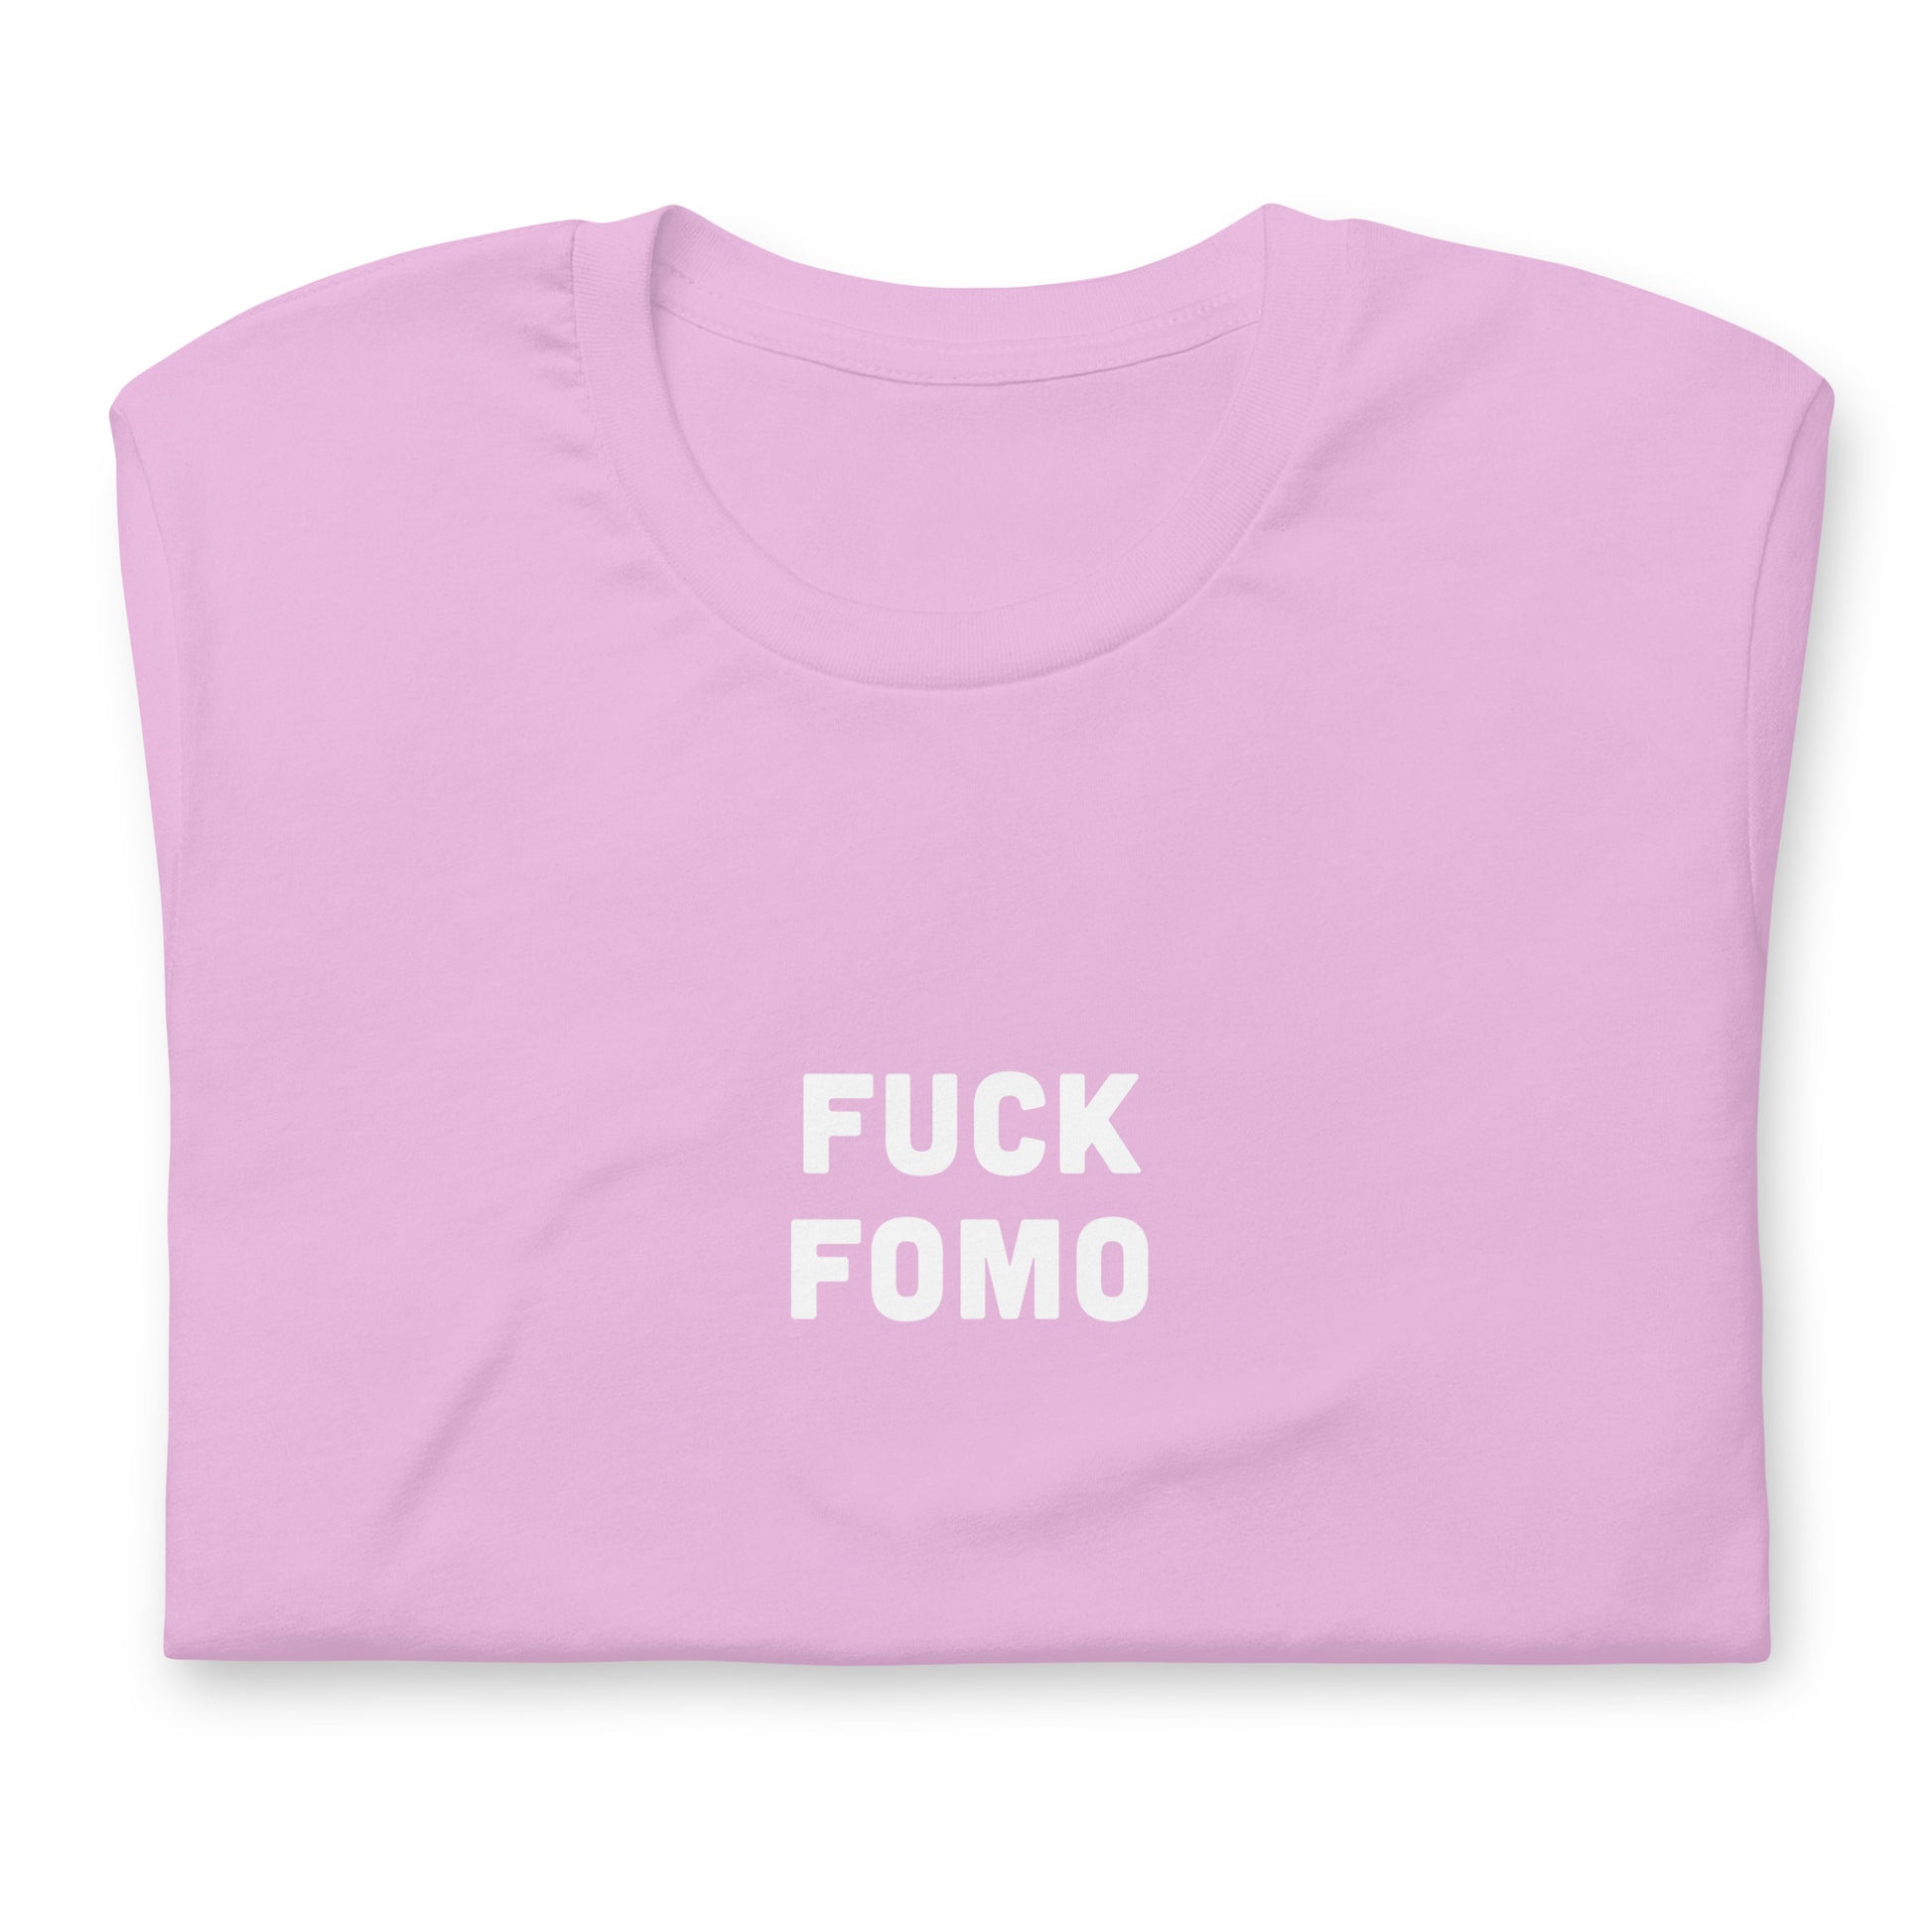 Fuck Fomo T-Shirt Size 2XL Color Forest